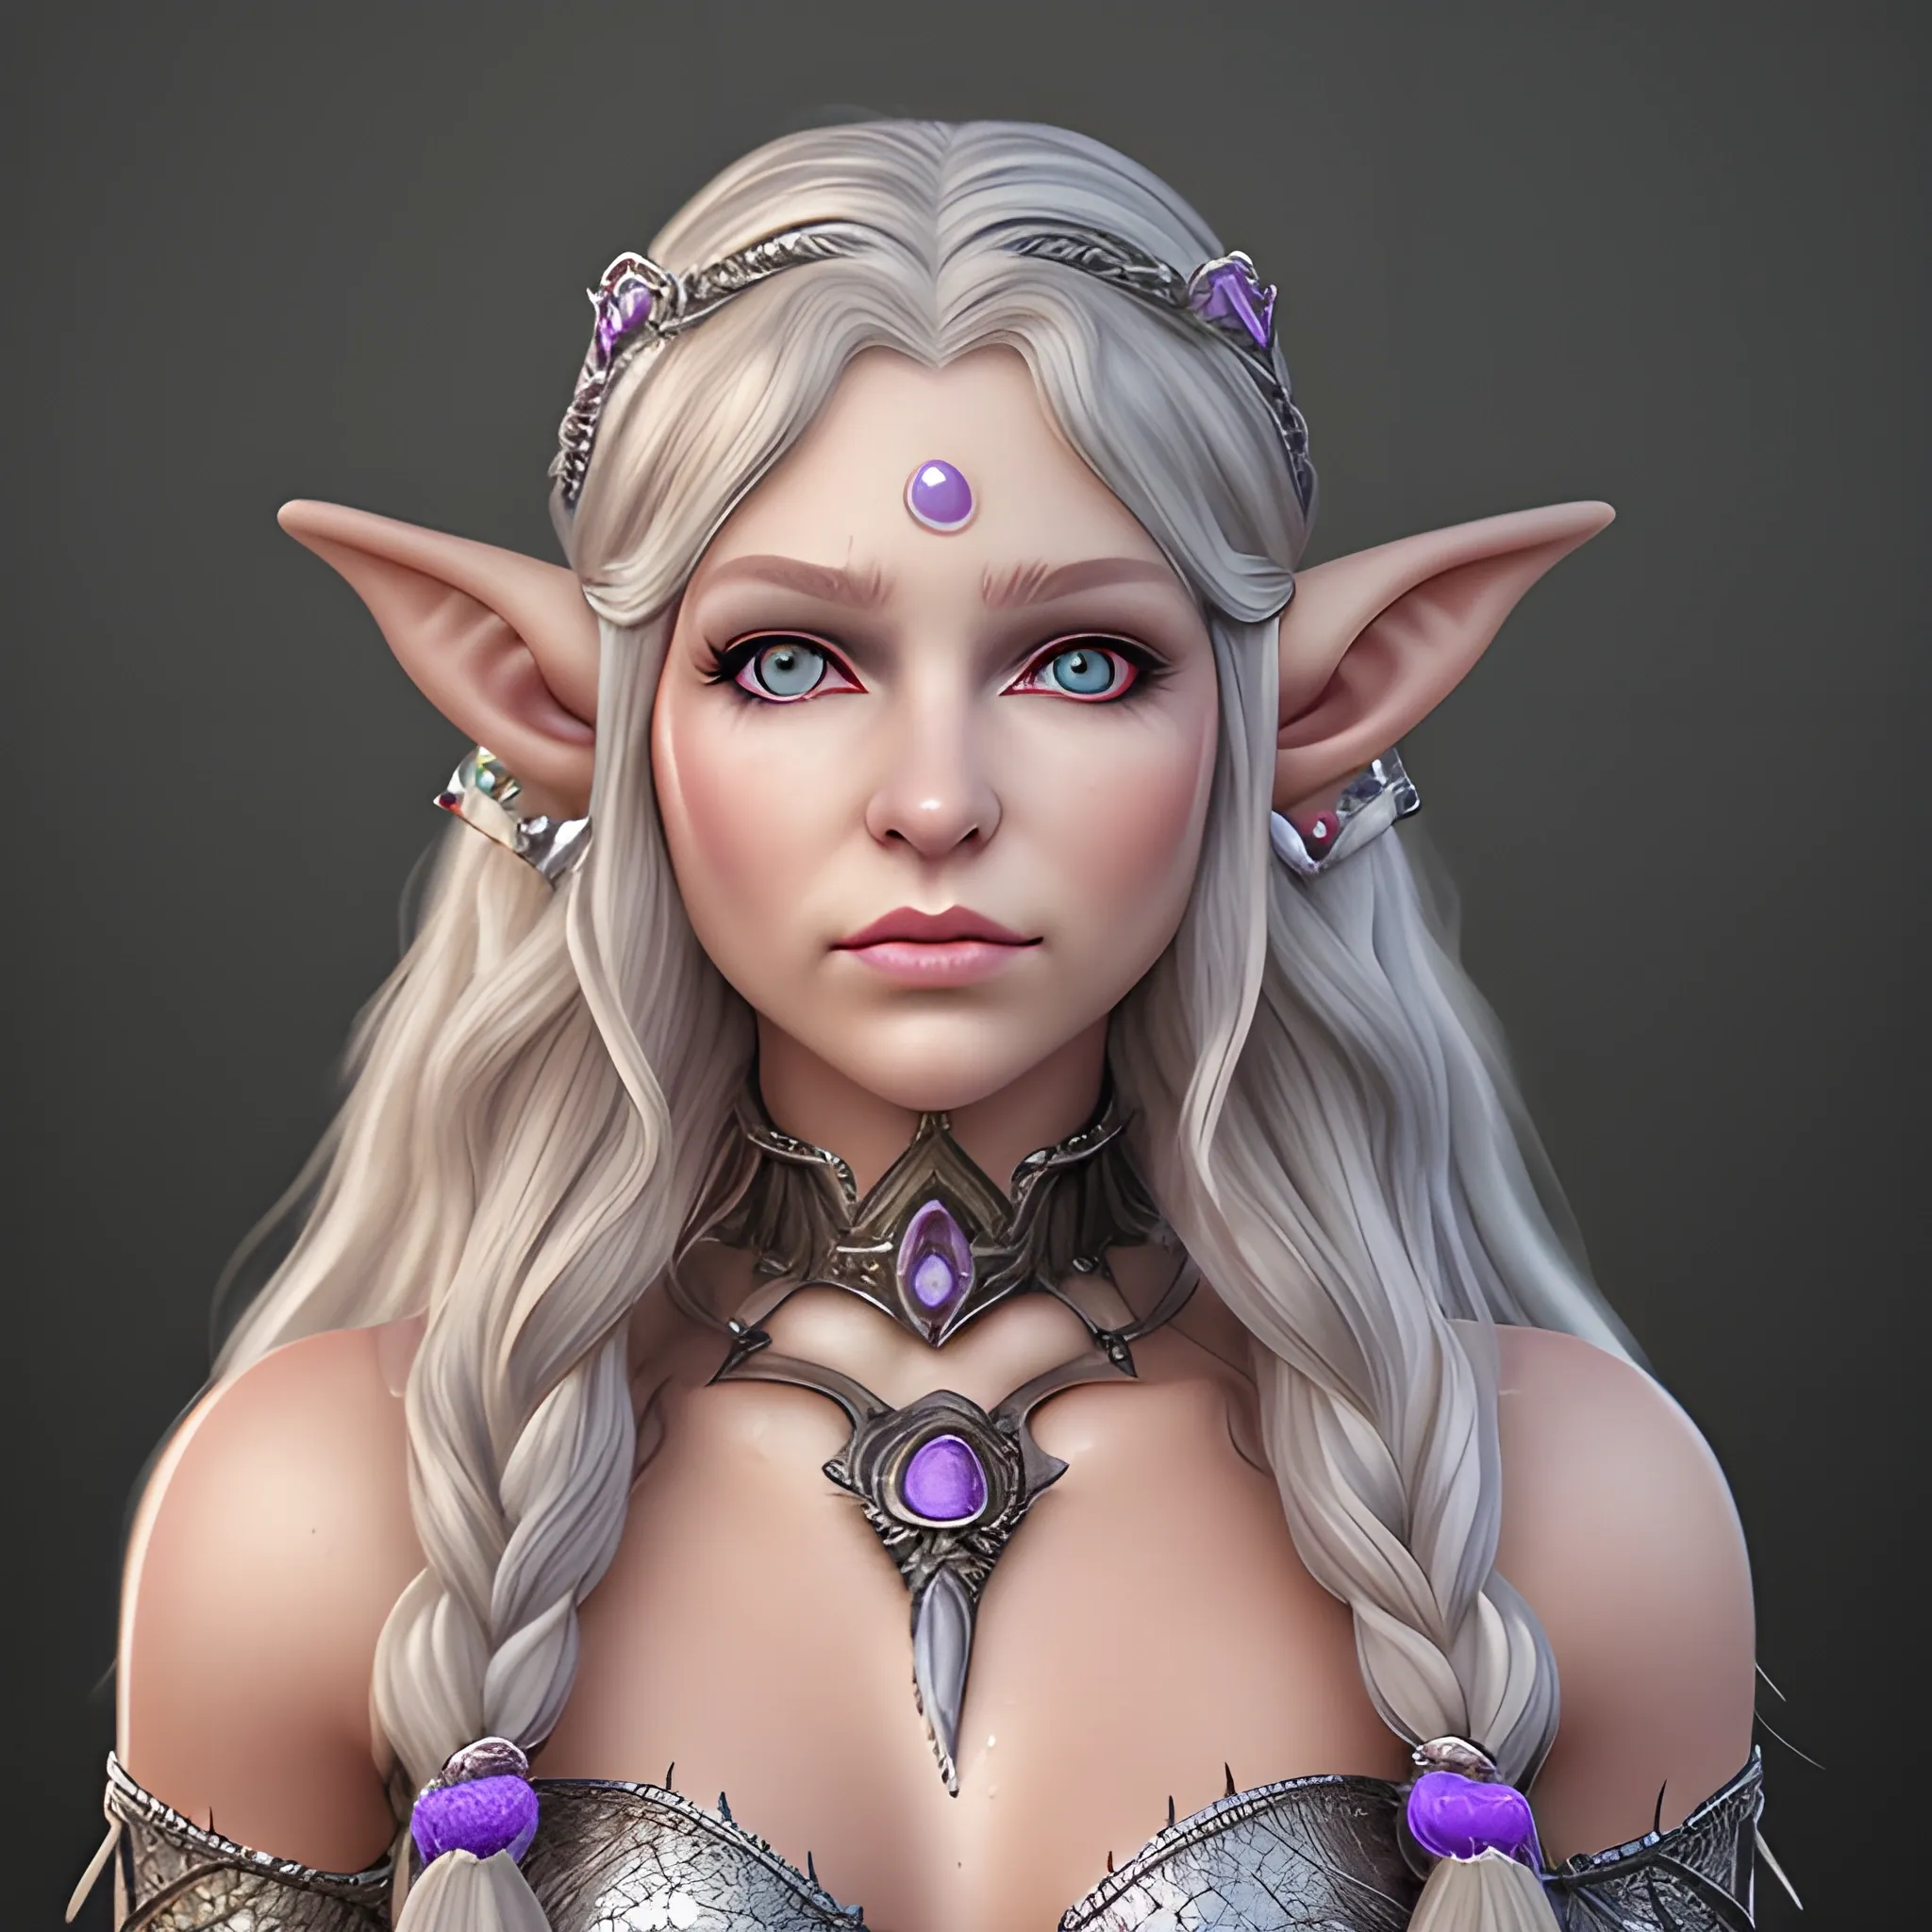 realistic, female elf, portrait, with long curling silver hair and purple eyes. Jeweled ears and body. Dewy skin, soft features queenly